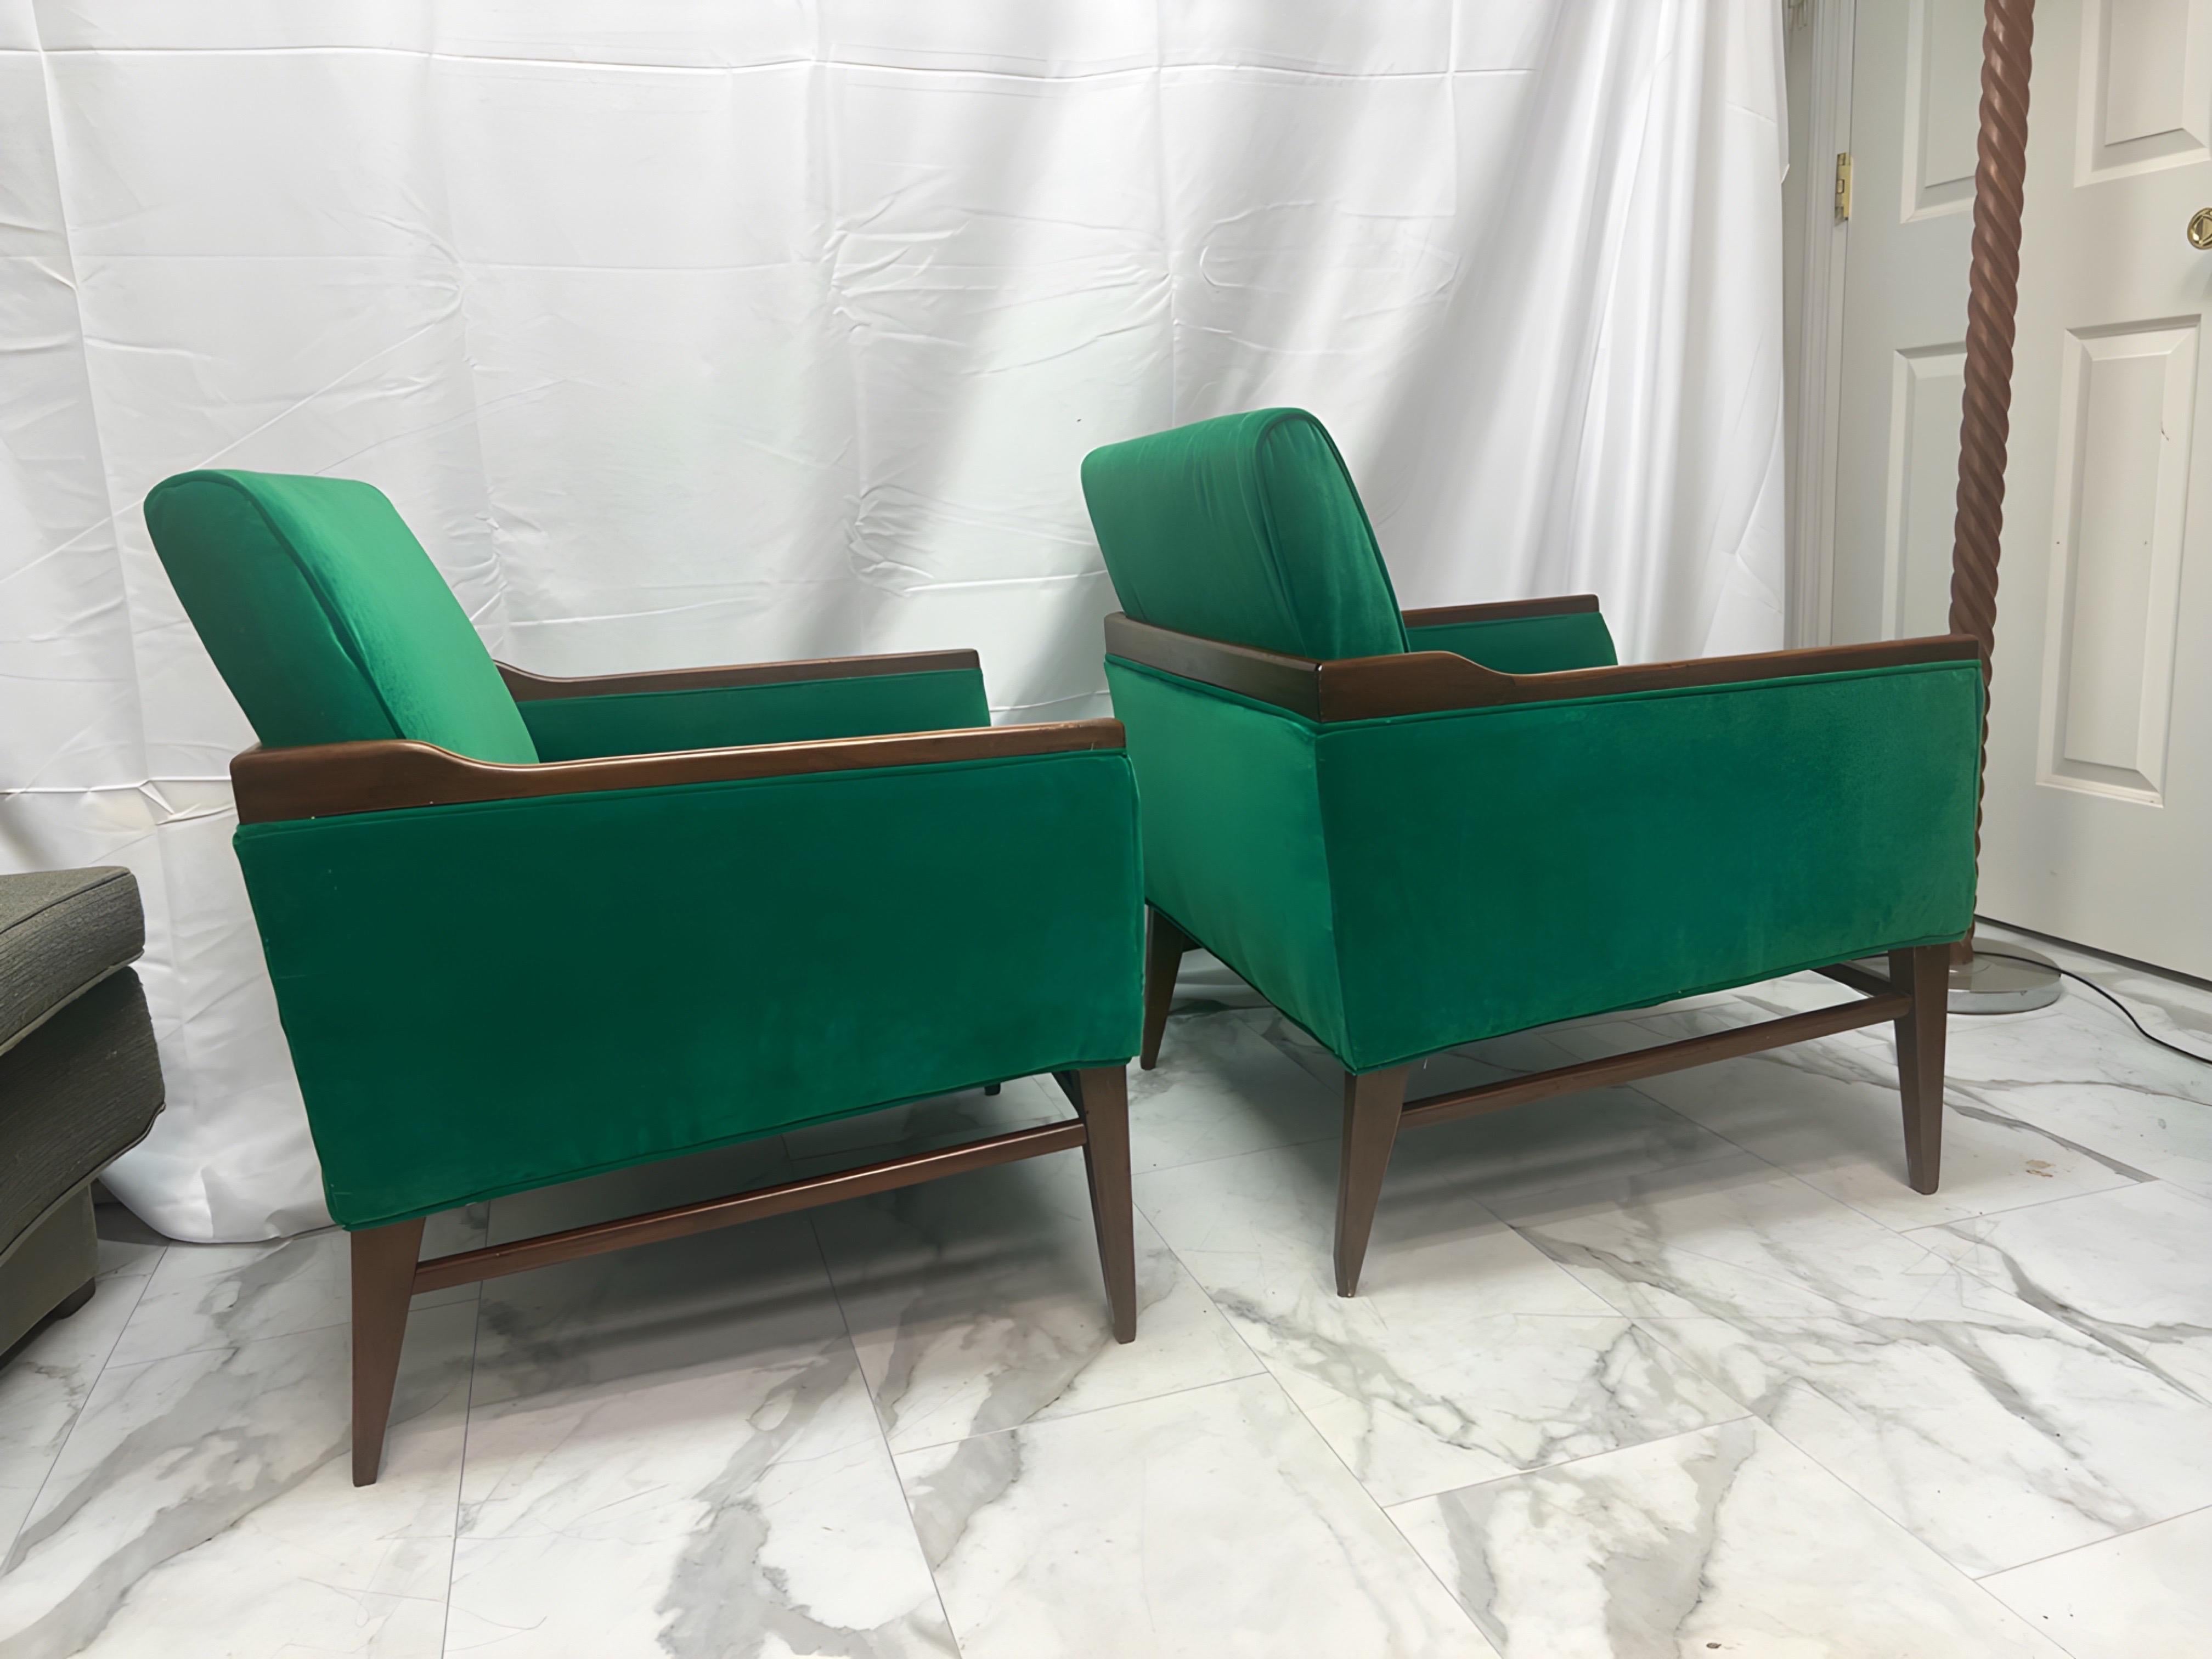 1950’s Walnut and Green Velvet Low Profile Chairs - a Pair For Sale 2